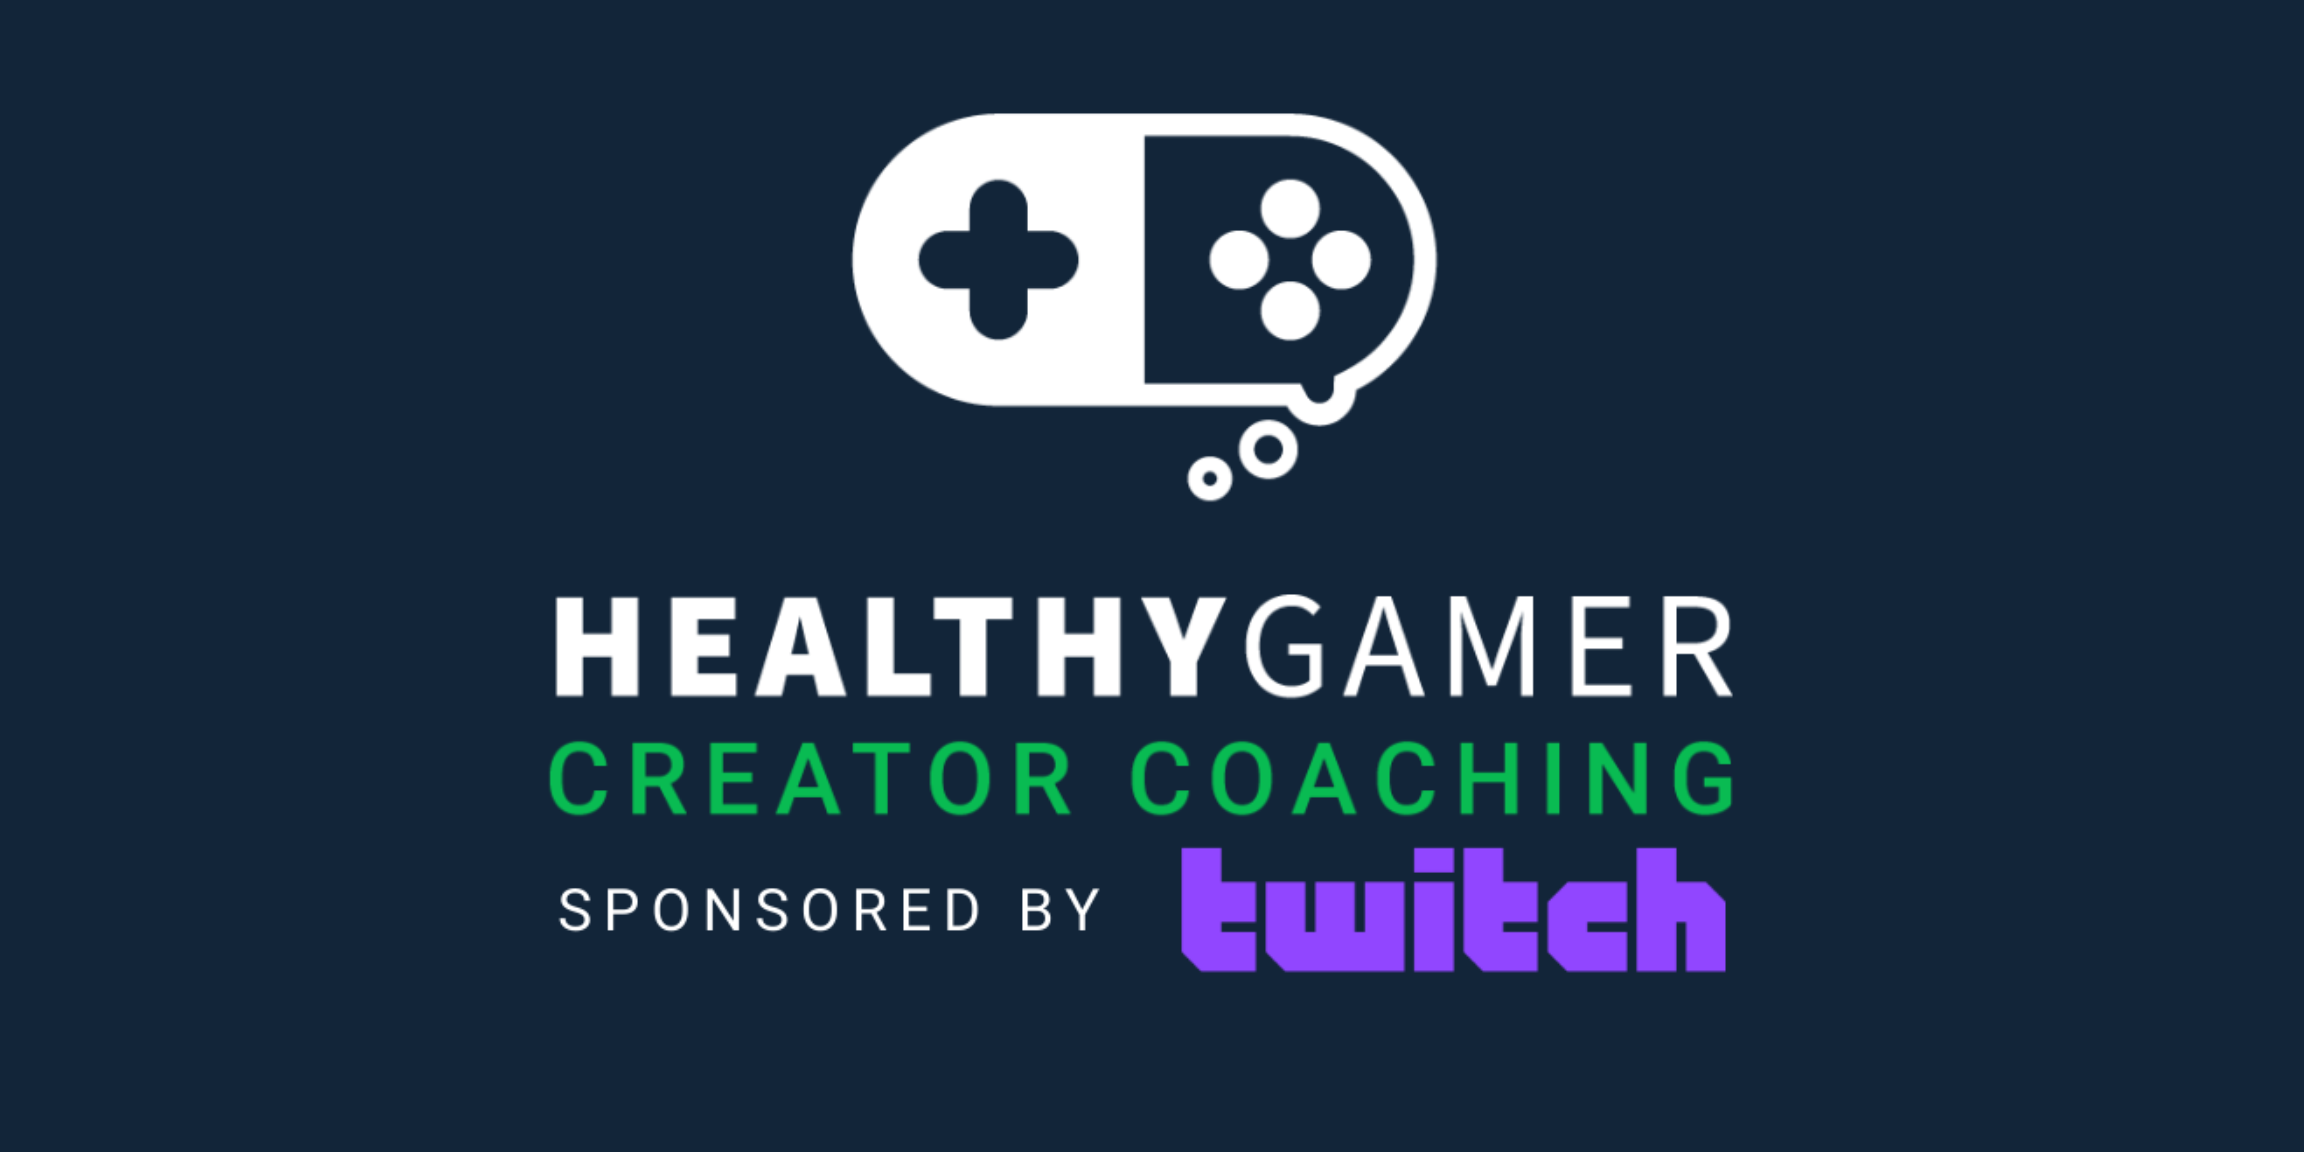 Healthy Gamer GG is a Twitch channel by a Harvard-trained